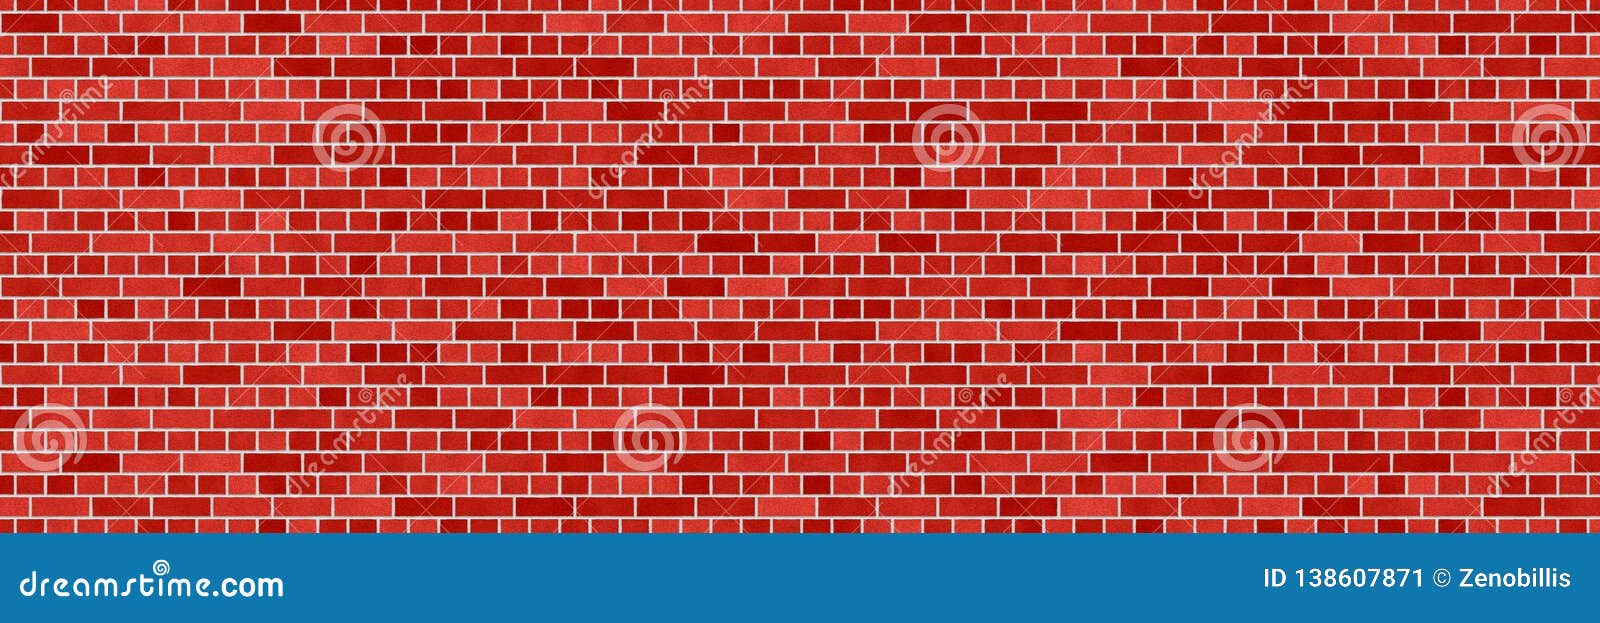 red brown brick wall abstract background. texture of bricks